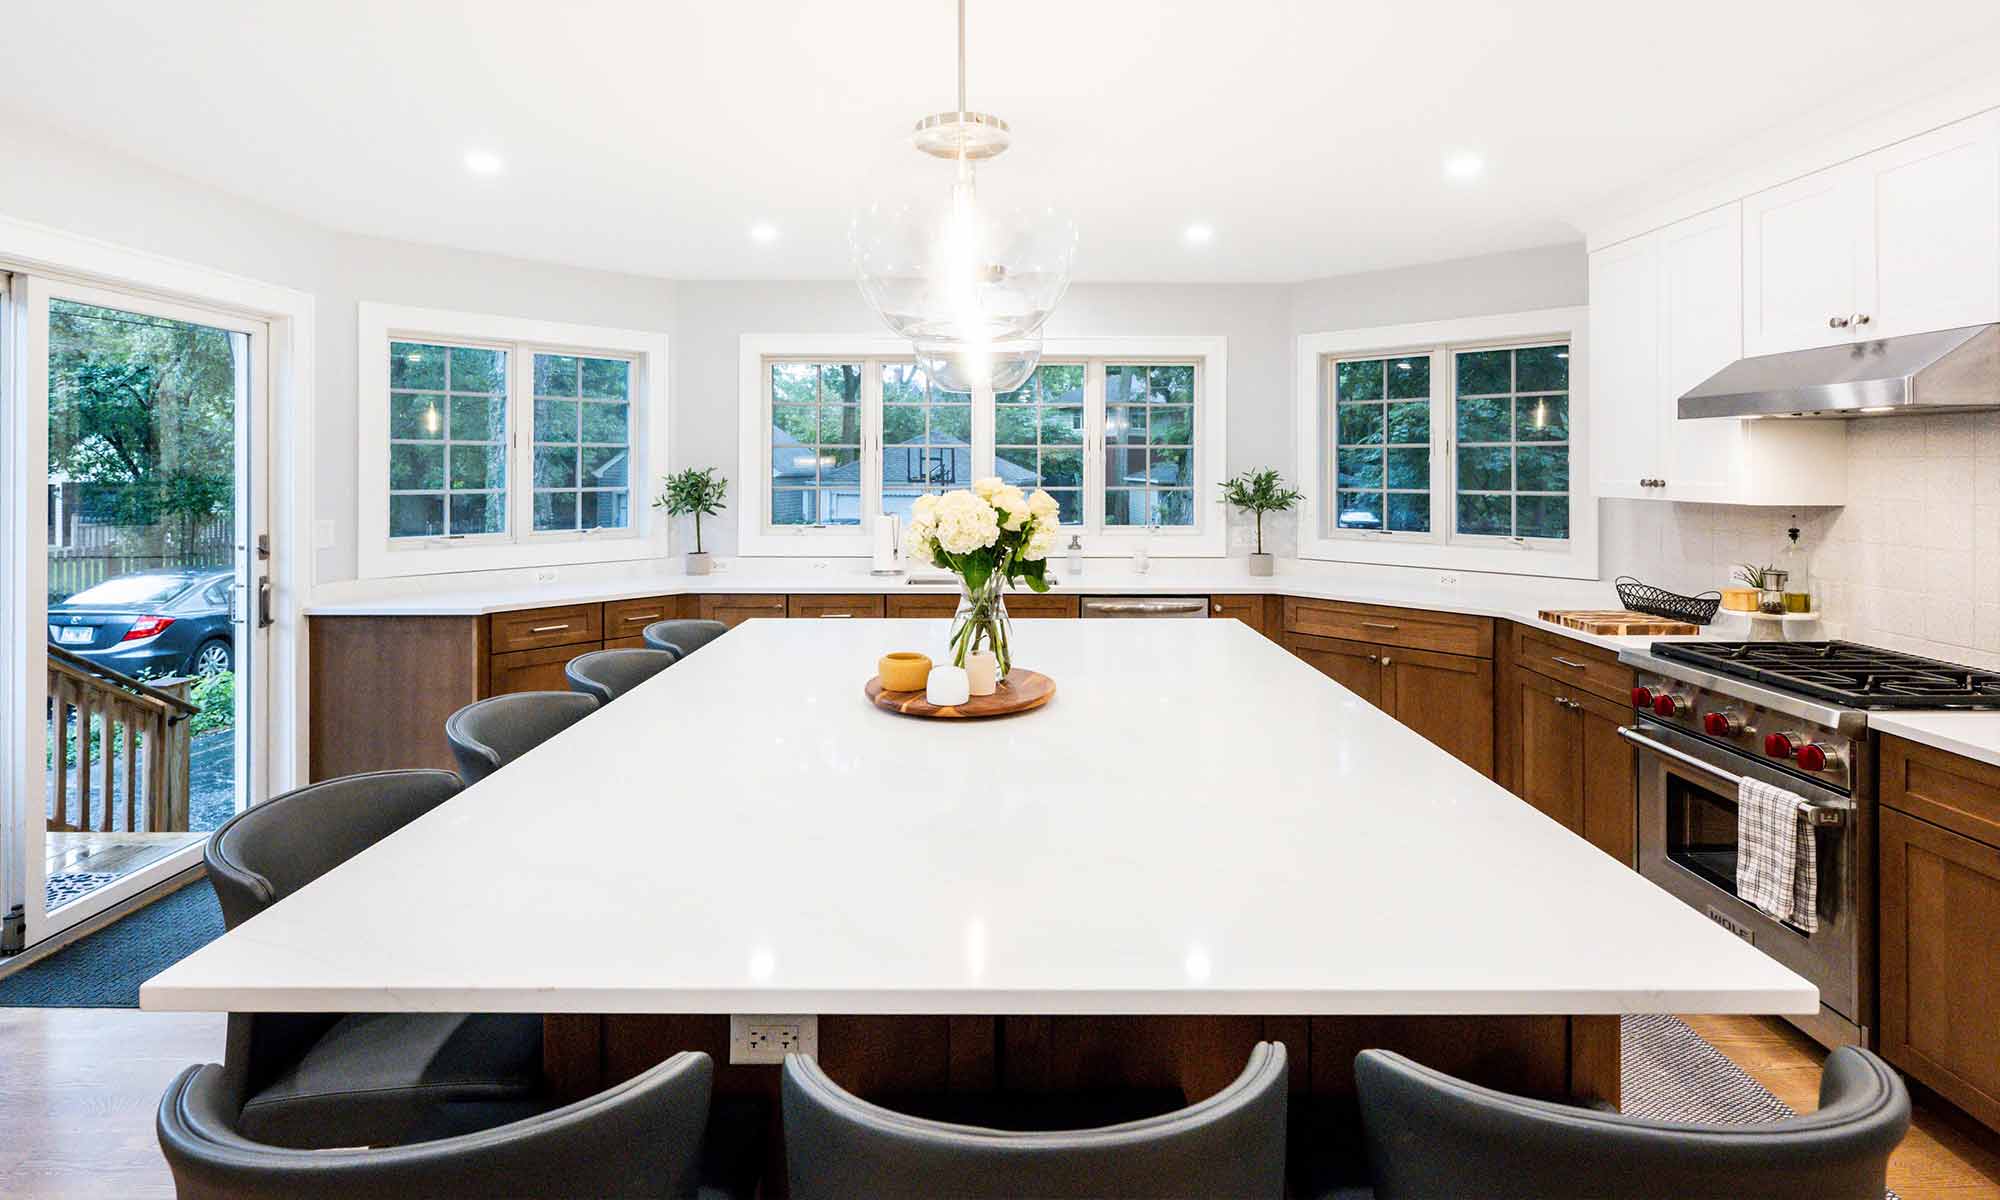 large kitchen island in luxury remodel with eight windows and white quartz countertops